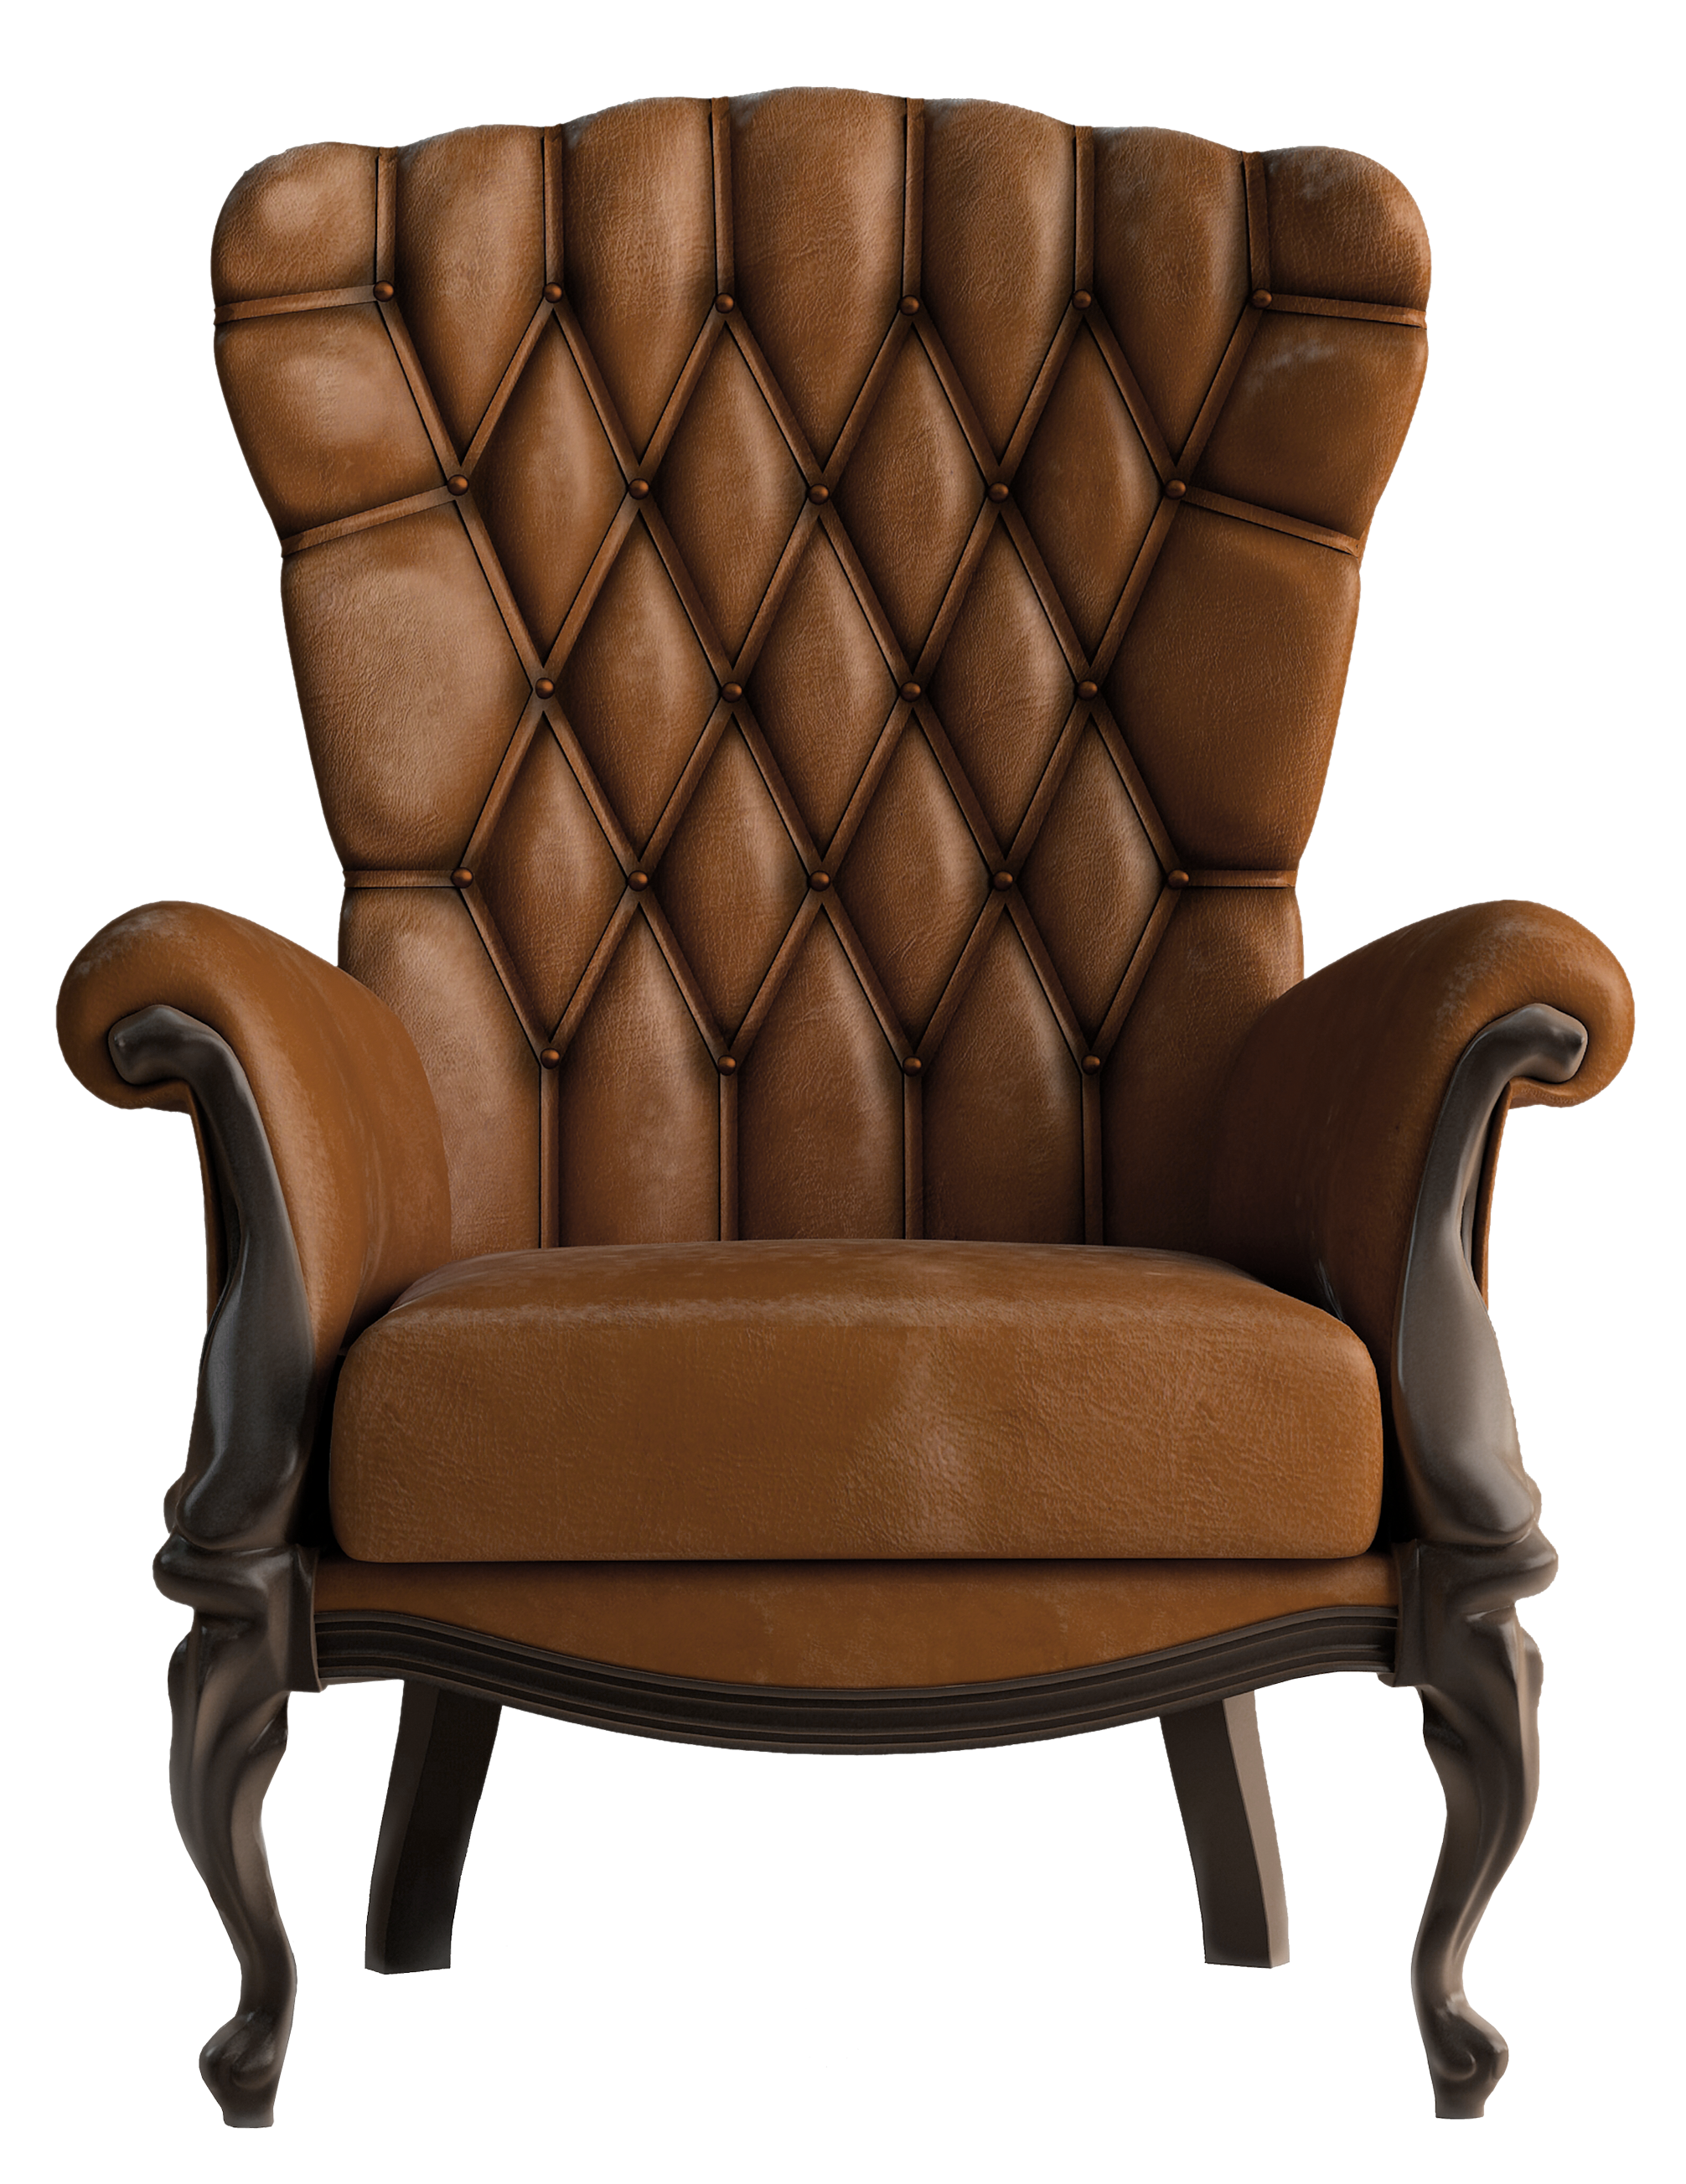 Chair PNG Transparent Images.